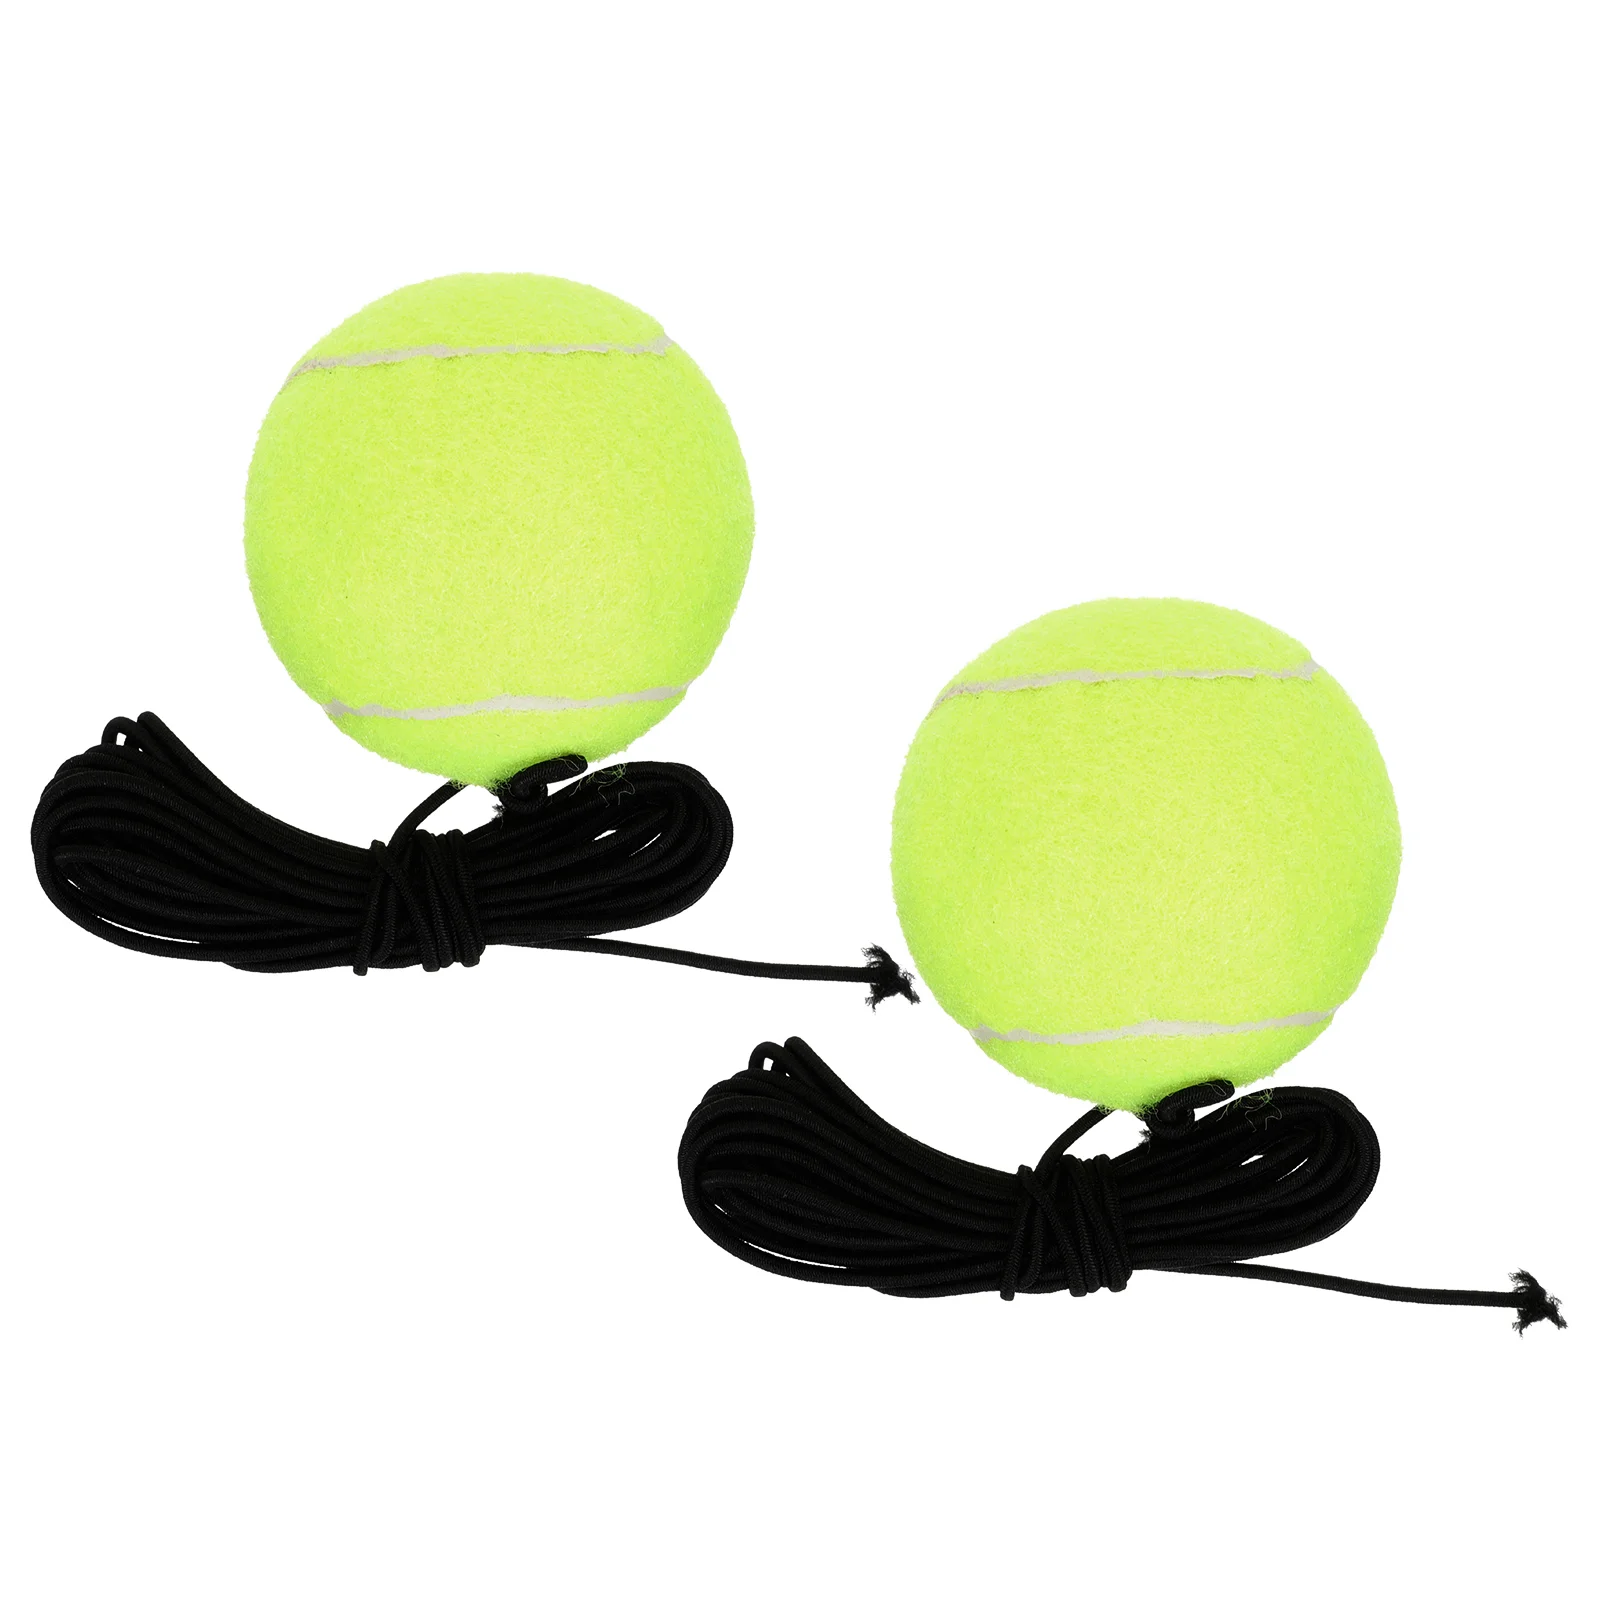 

2 Pcs Rope Tennis Out Door Toys Training Ball High Bounce Balls Nylon Dog Tool Woolen Surfaced Individual Self